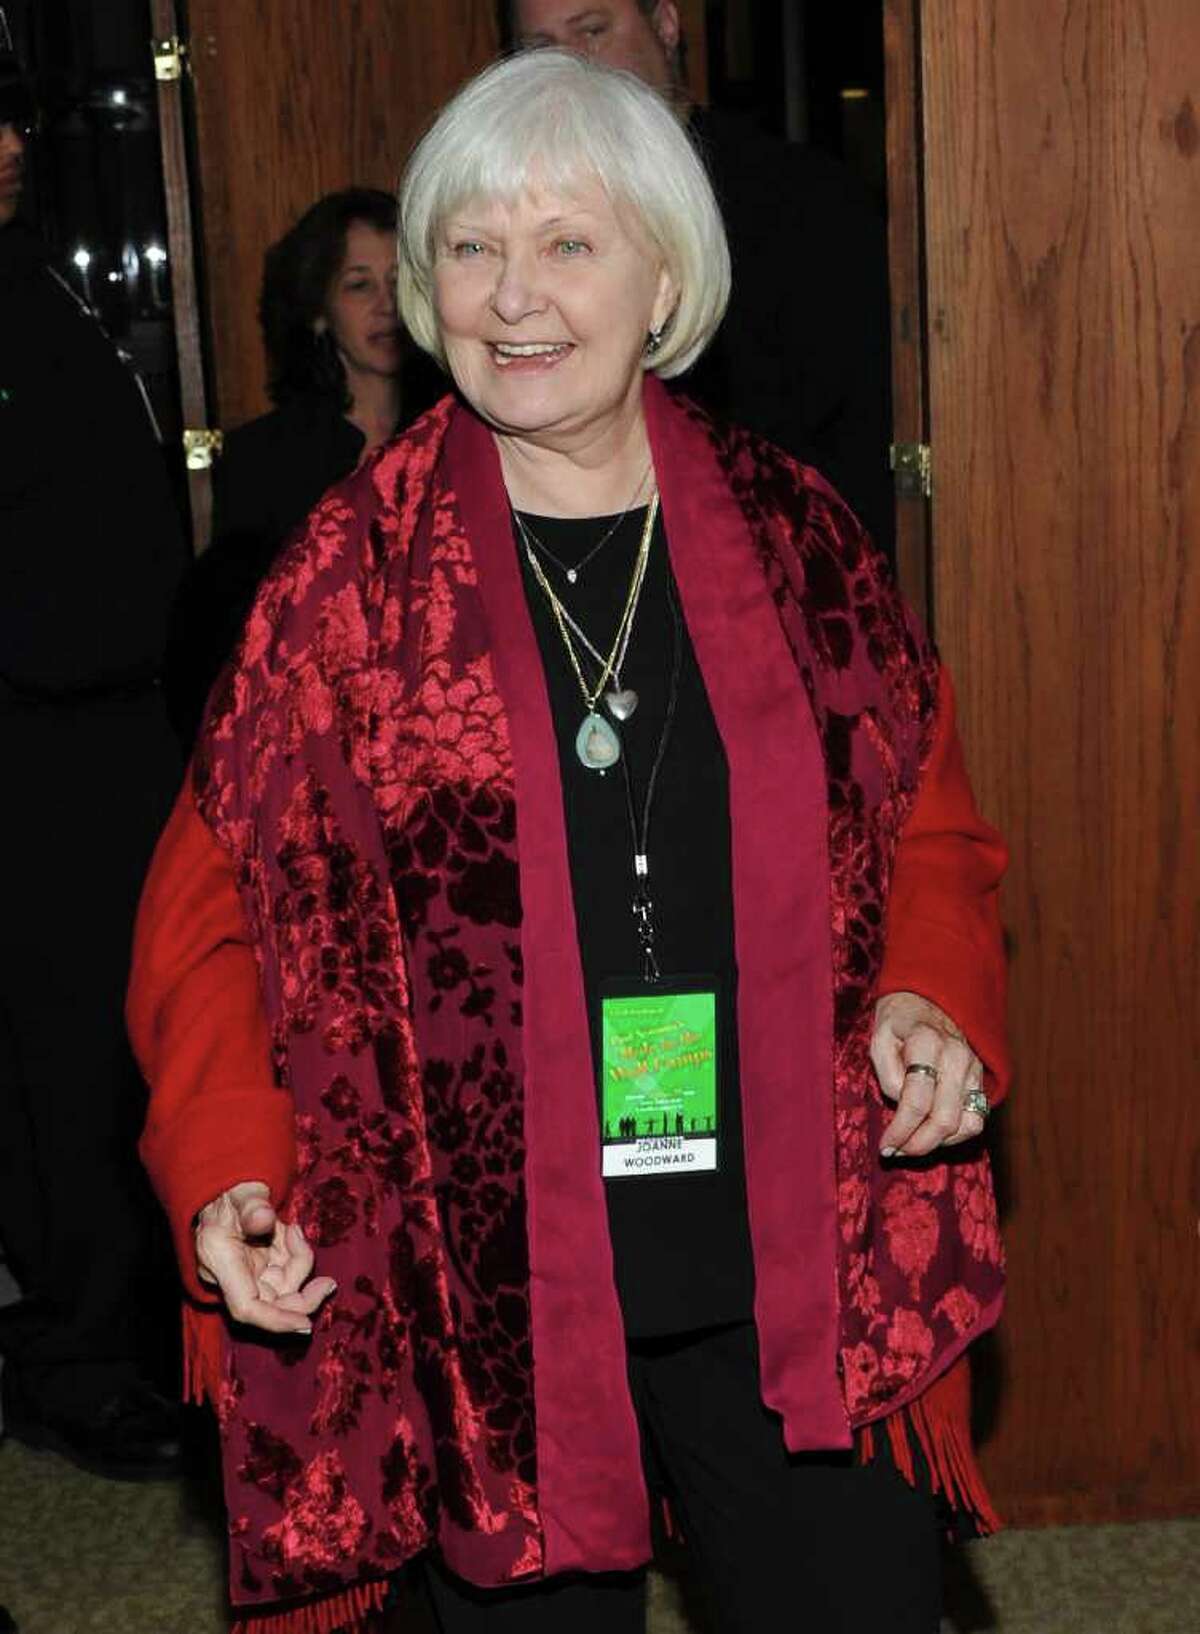 Actress Joanne Woodward attends the "Hole In The Wall Camps" benefit concert at Avery Fisher Hall on Thursday, Oct. 21, 2010 in New York. (AP Photo/Evan Agostini)